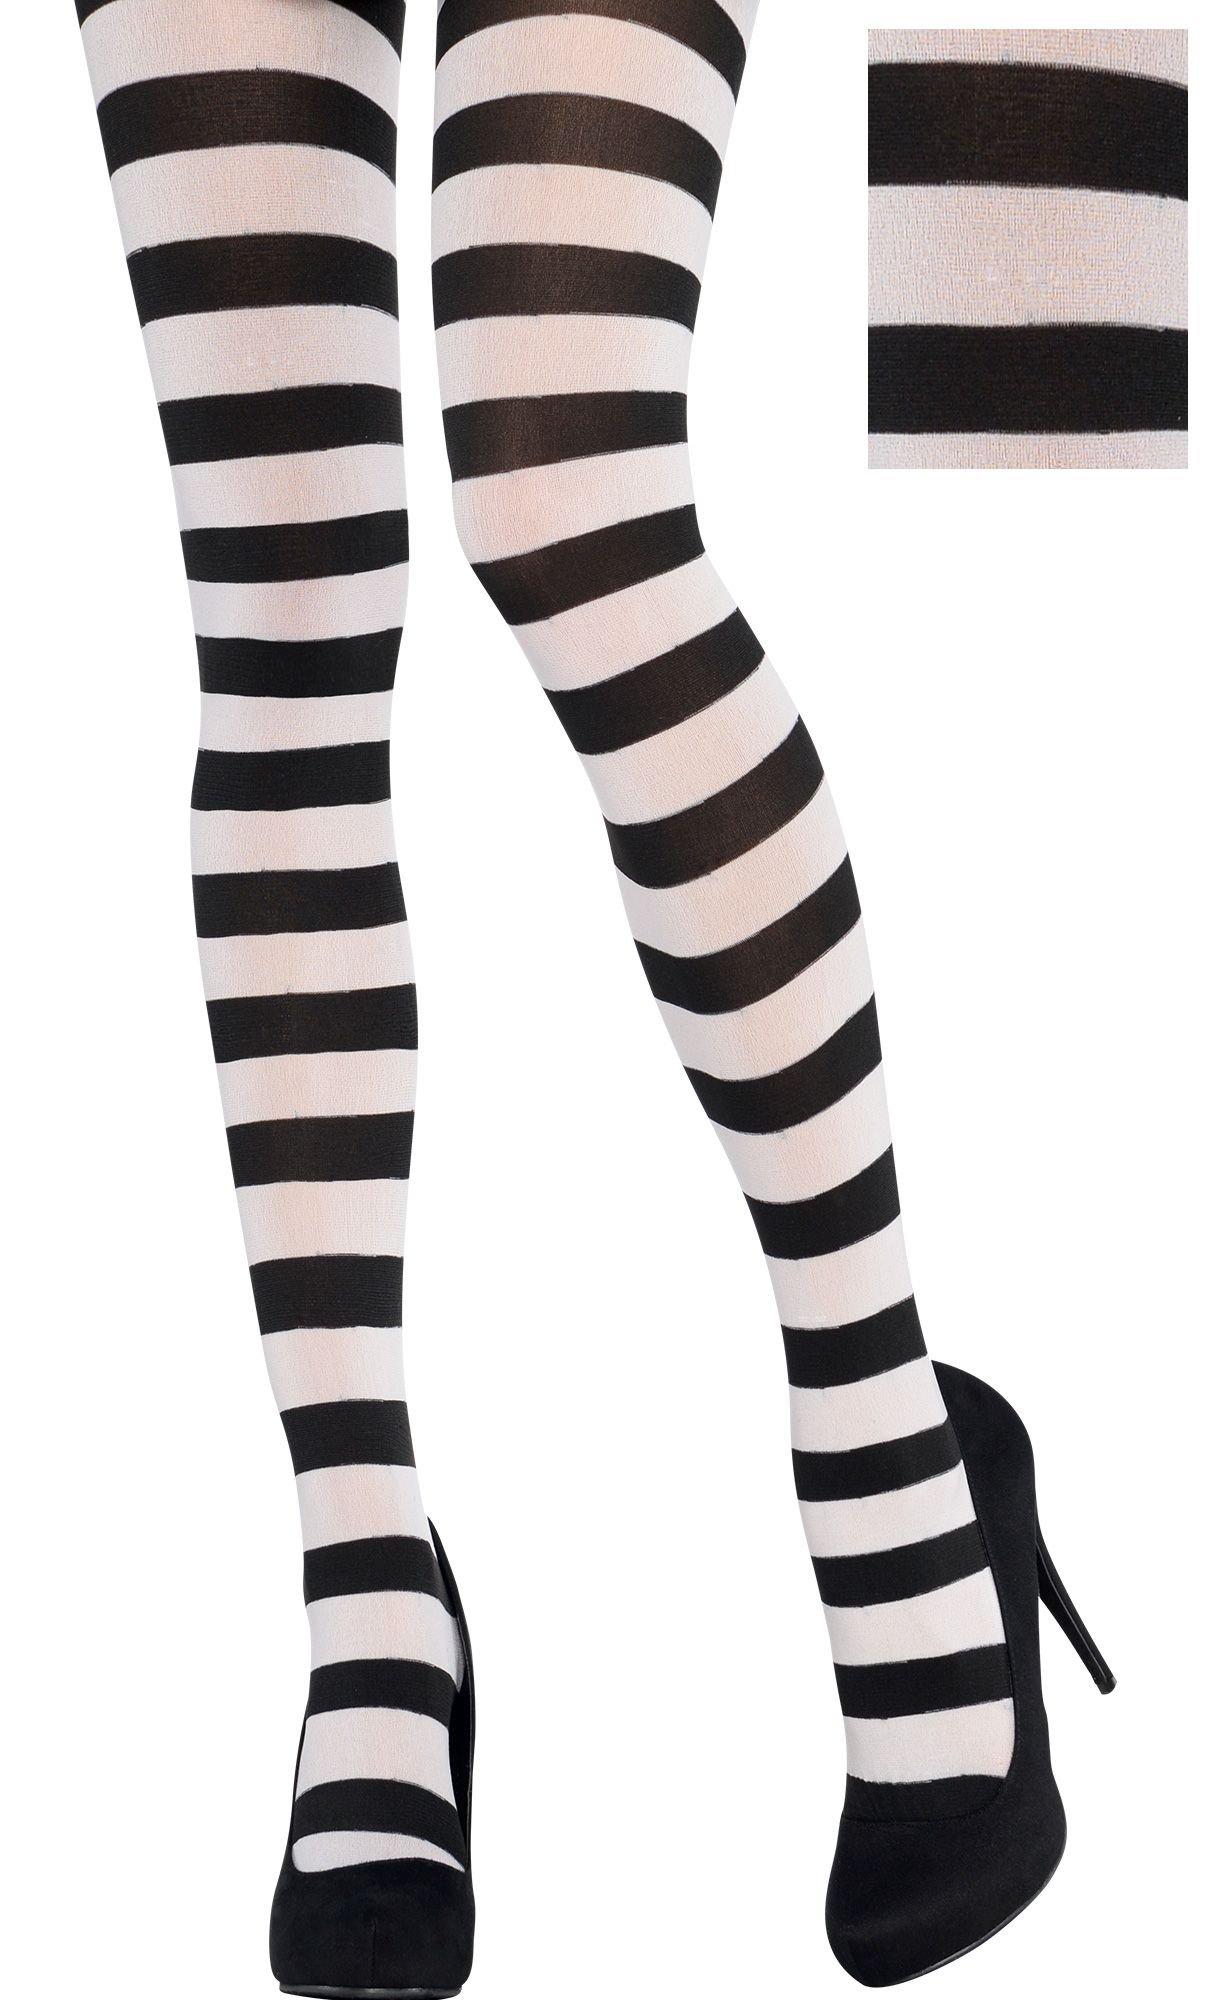 Adult Black & White Striped Tights